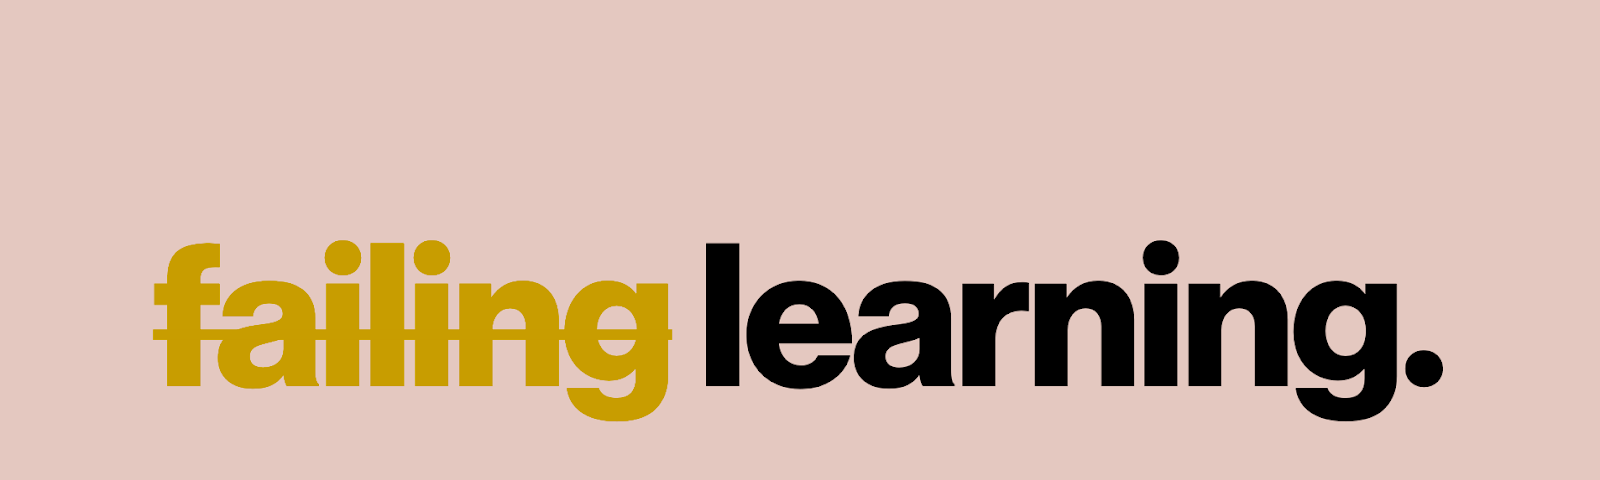 The word ‘failing’ crossed out and replaced with the word ‘learning’.